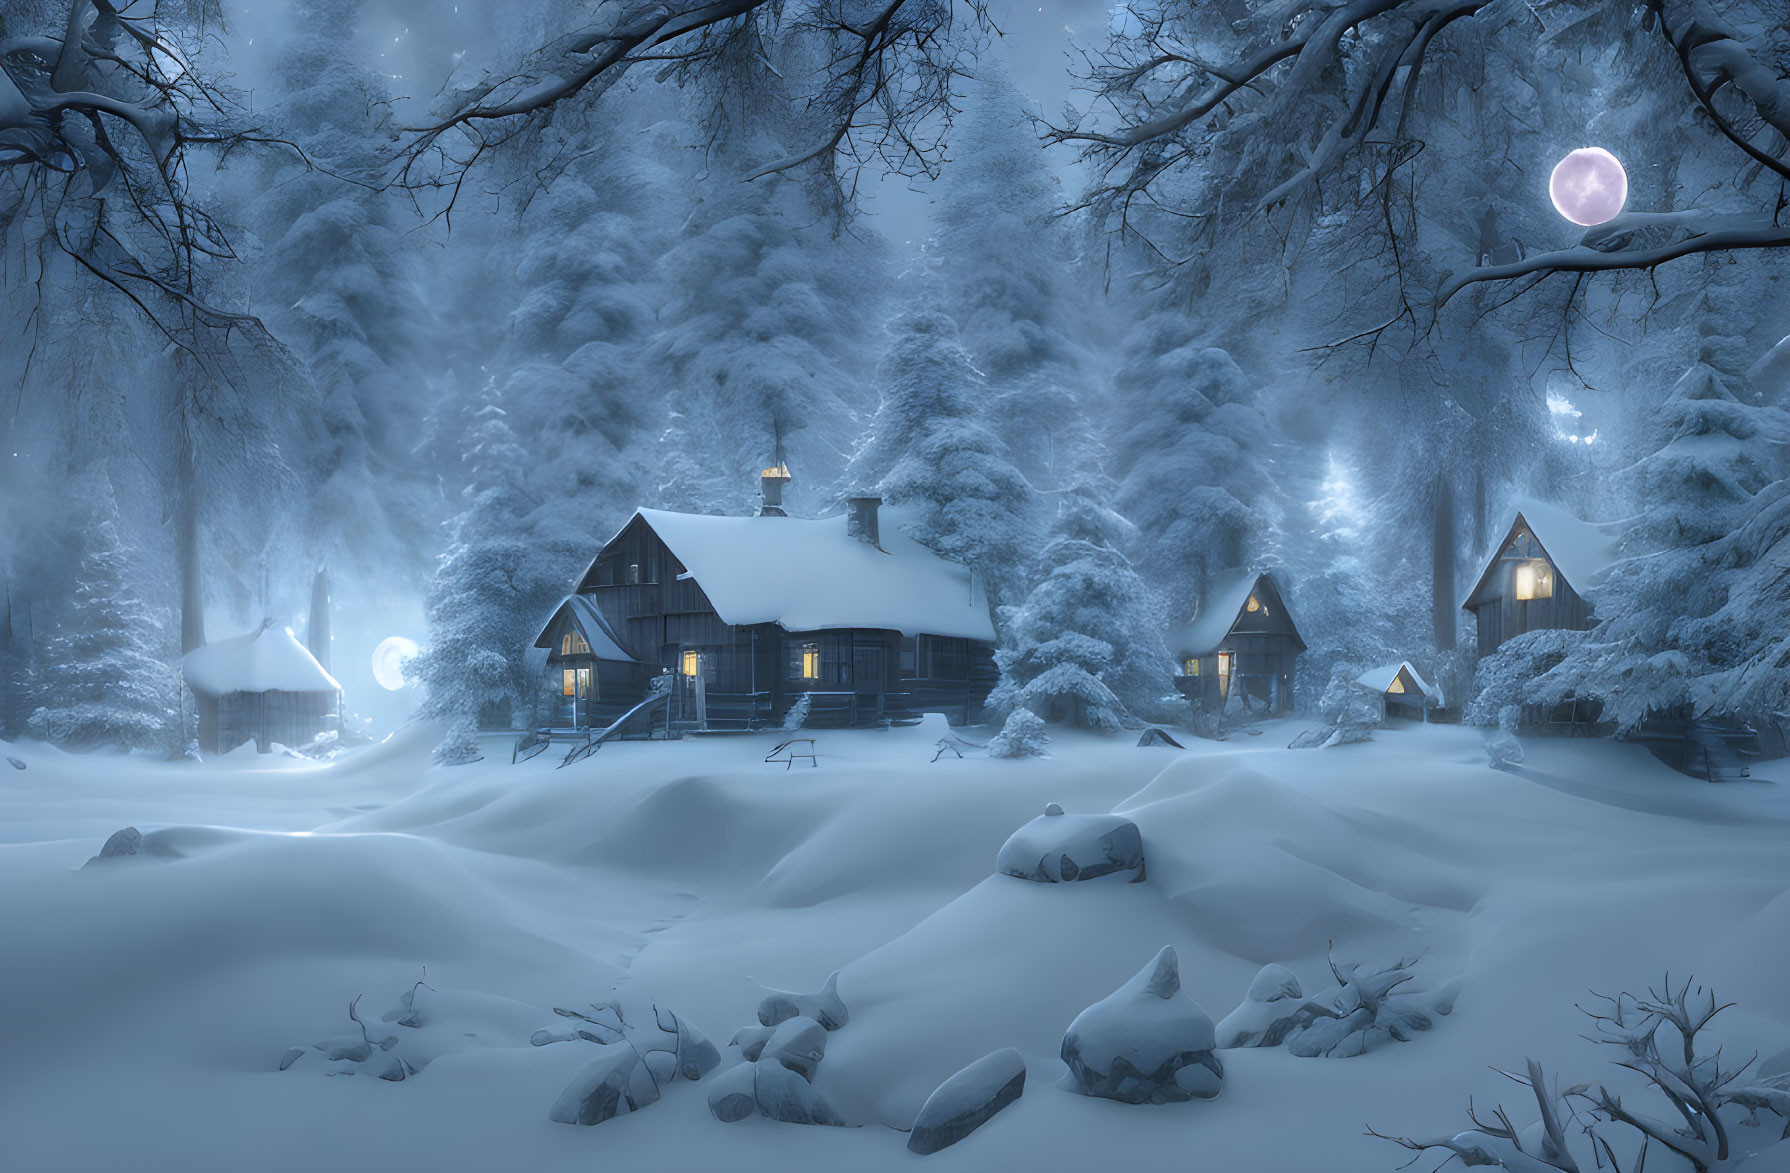 Snow-covered trees and houses under full moon on serene winter night